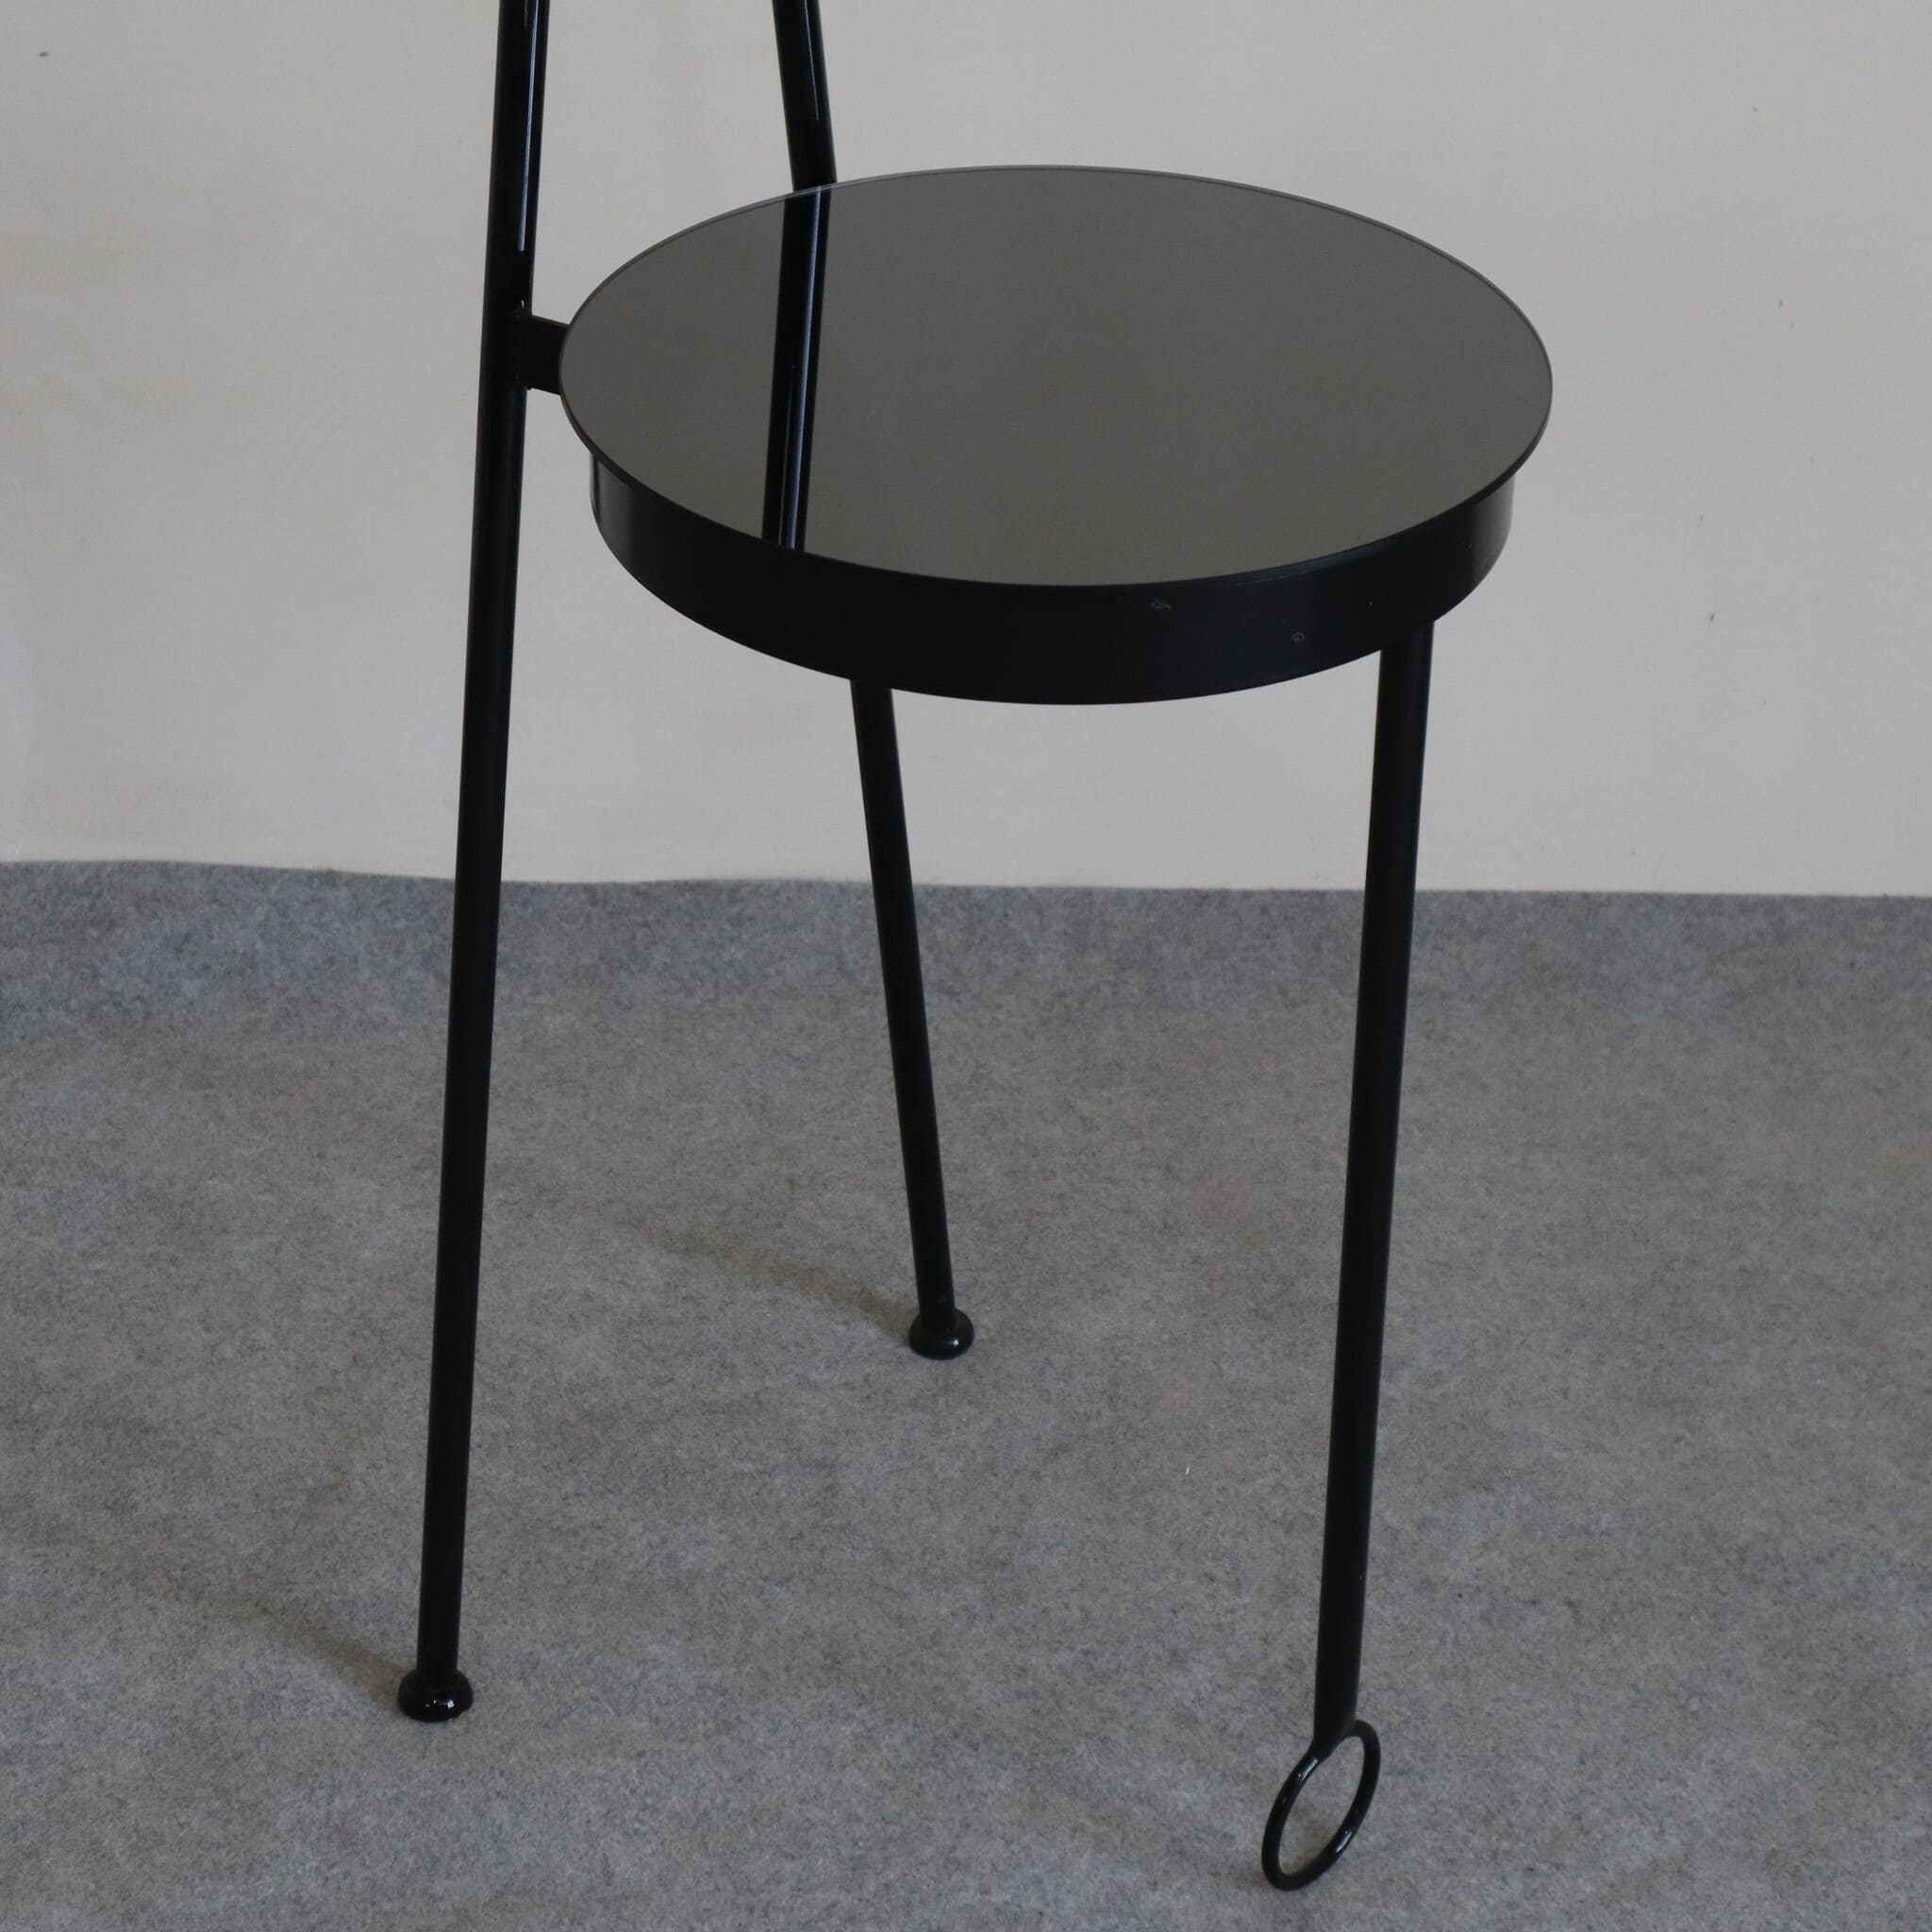 90s-black-dressing table-grey-mirror-philippe-starck-style-detail-of-base-and-feet-visionidepoca